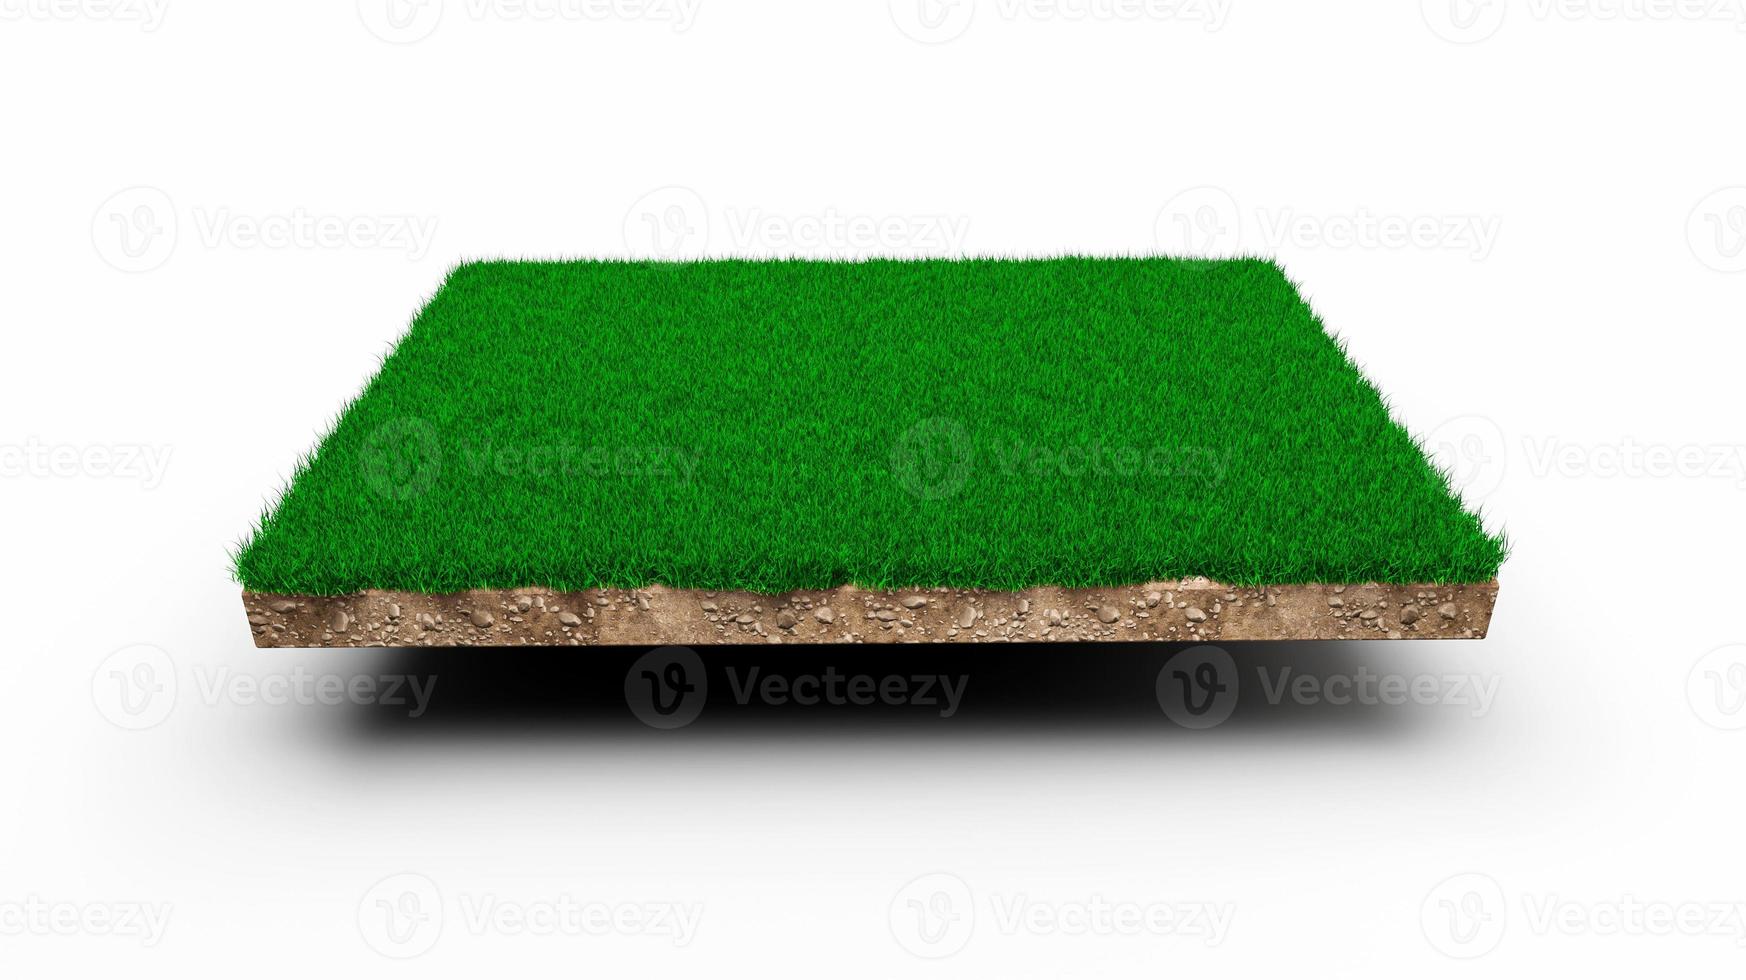 Square of green grass field on background 3D Illustration photo